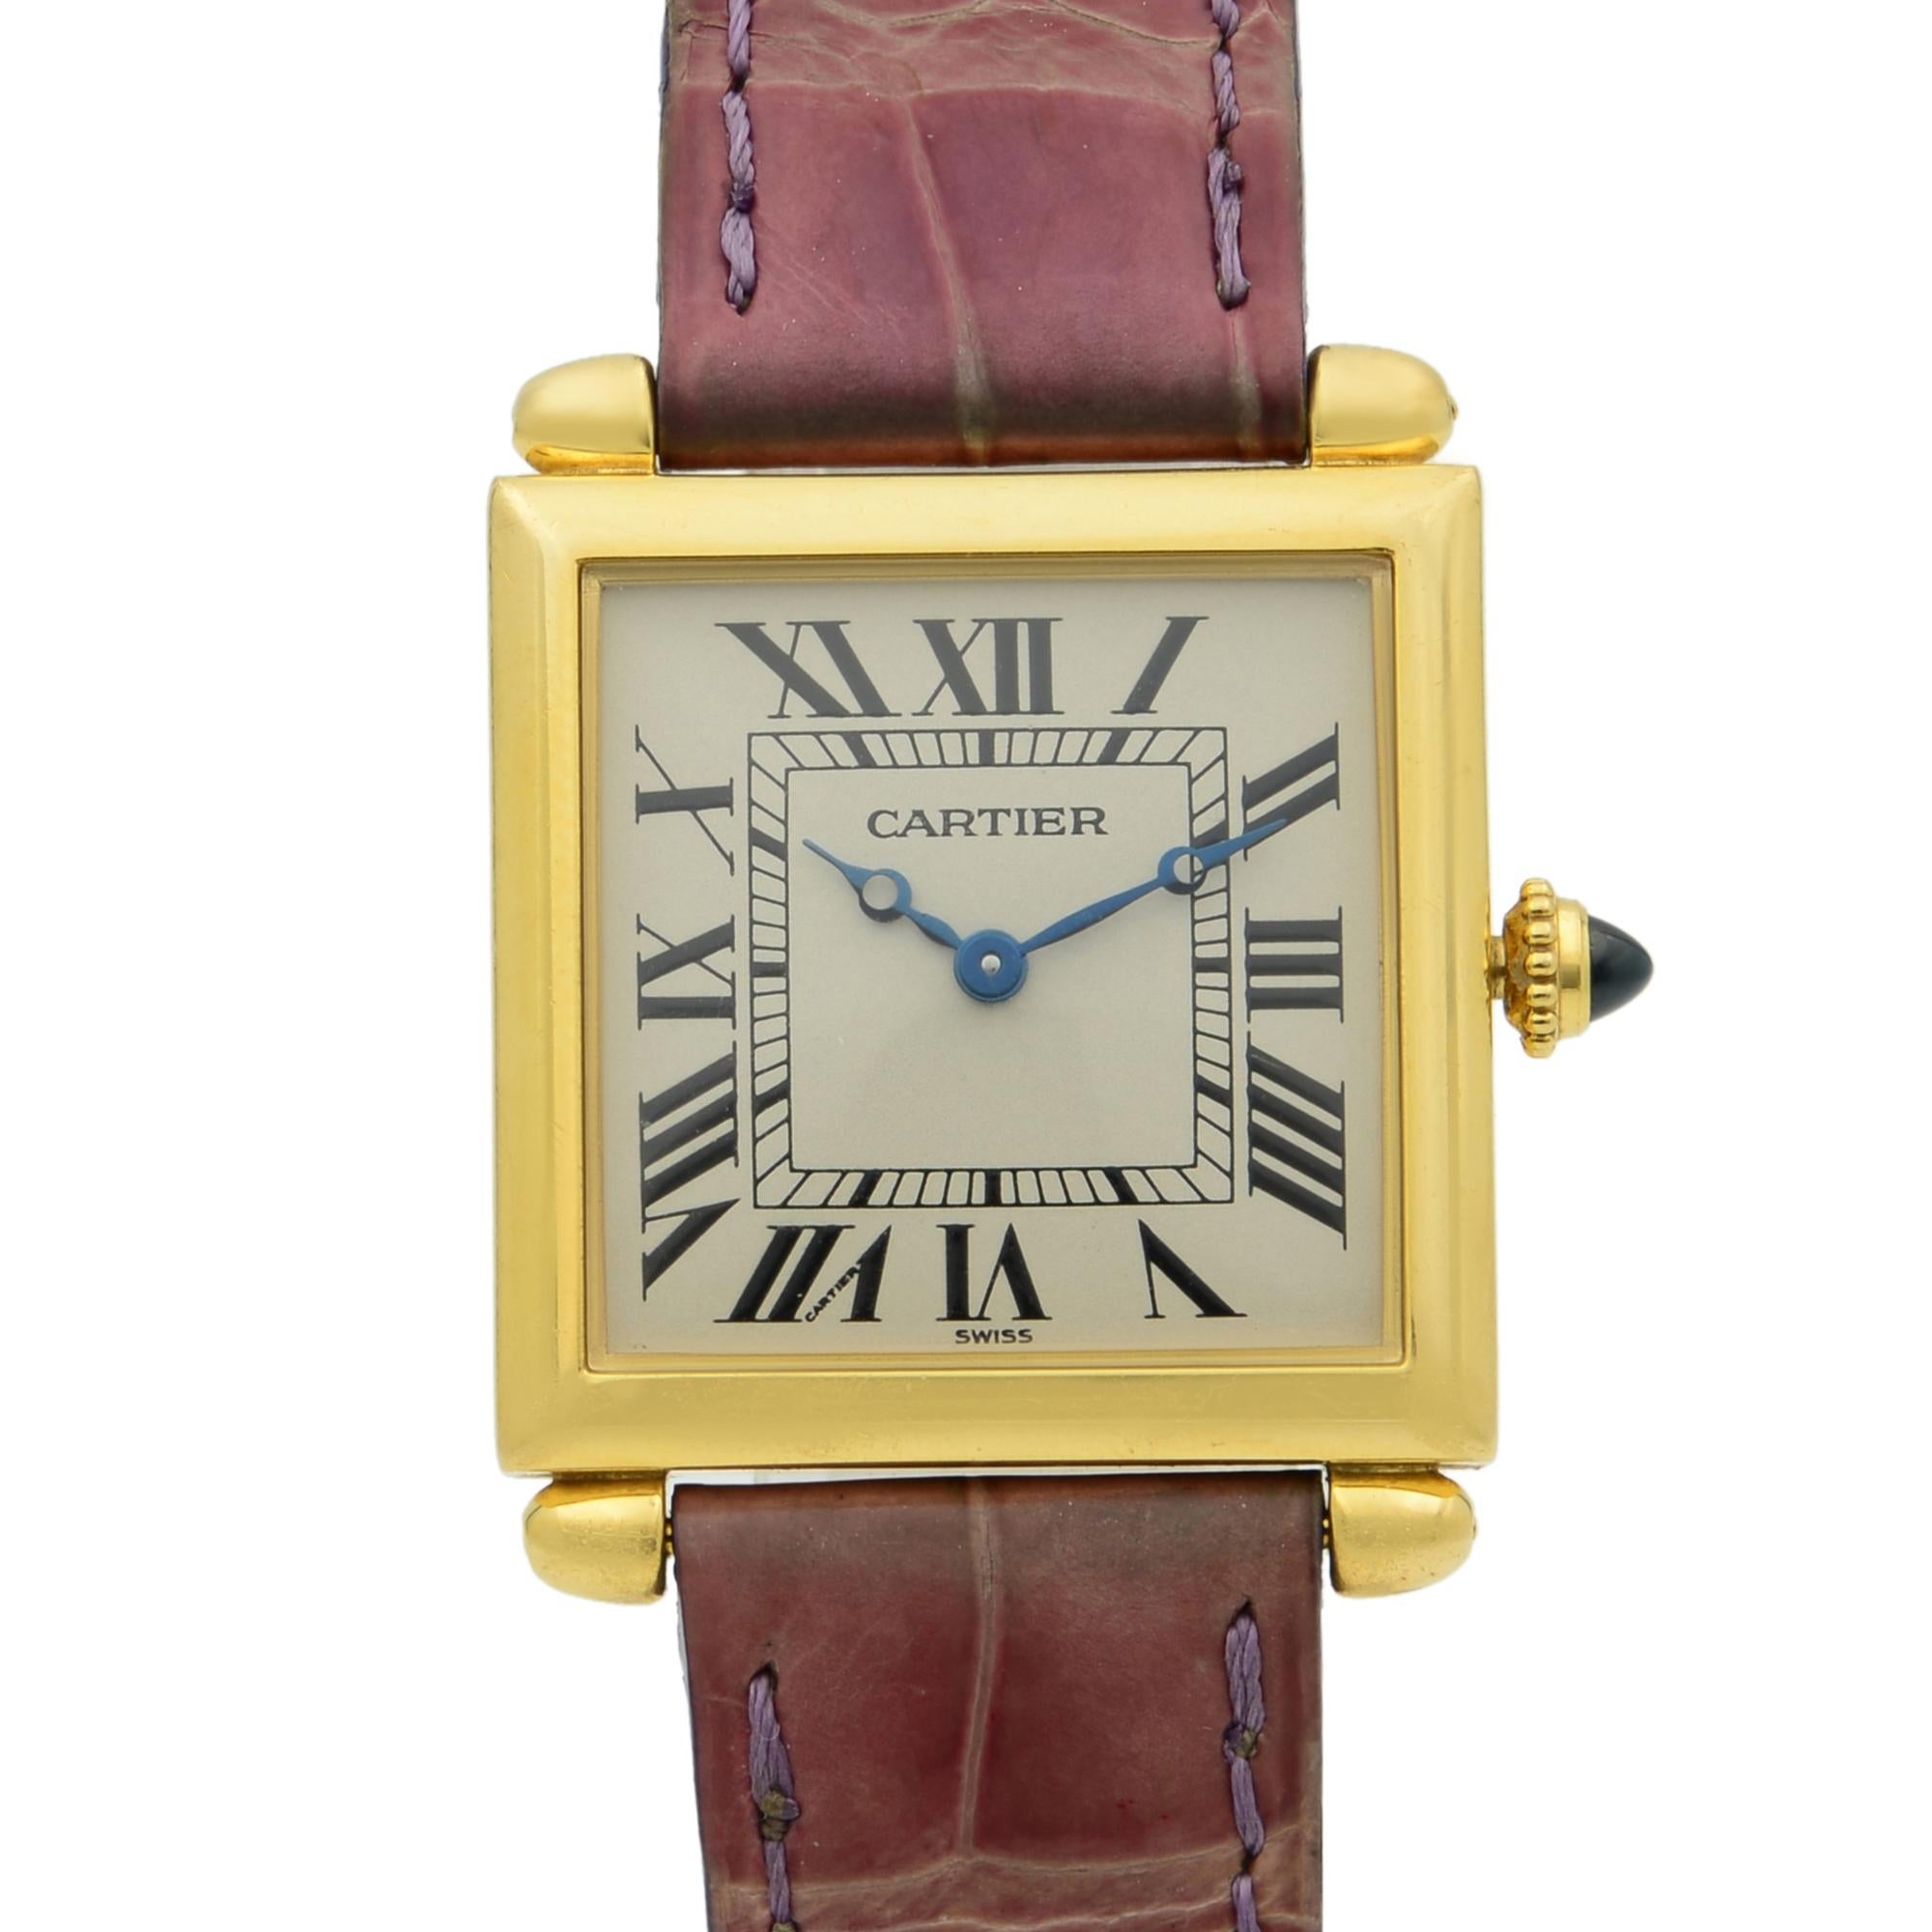 This pre-owned Cartier Tank Obus 1630 is a beautiful Ladie's timepiece that is powered by quartz (battery) movement which is cased in a yellow gold case. It has a  rectangle shape face,  dial, and has hand roman numerals style markers. It is